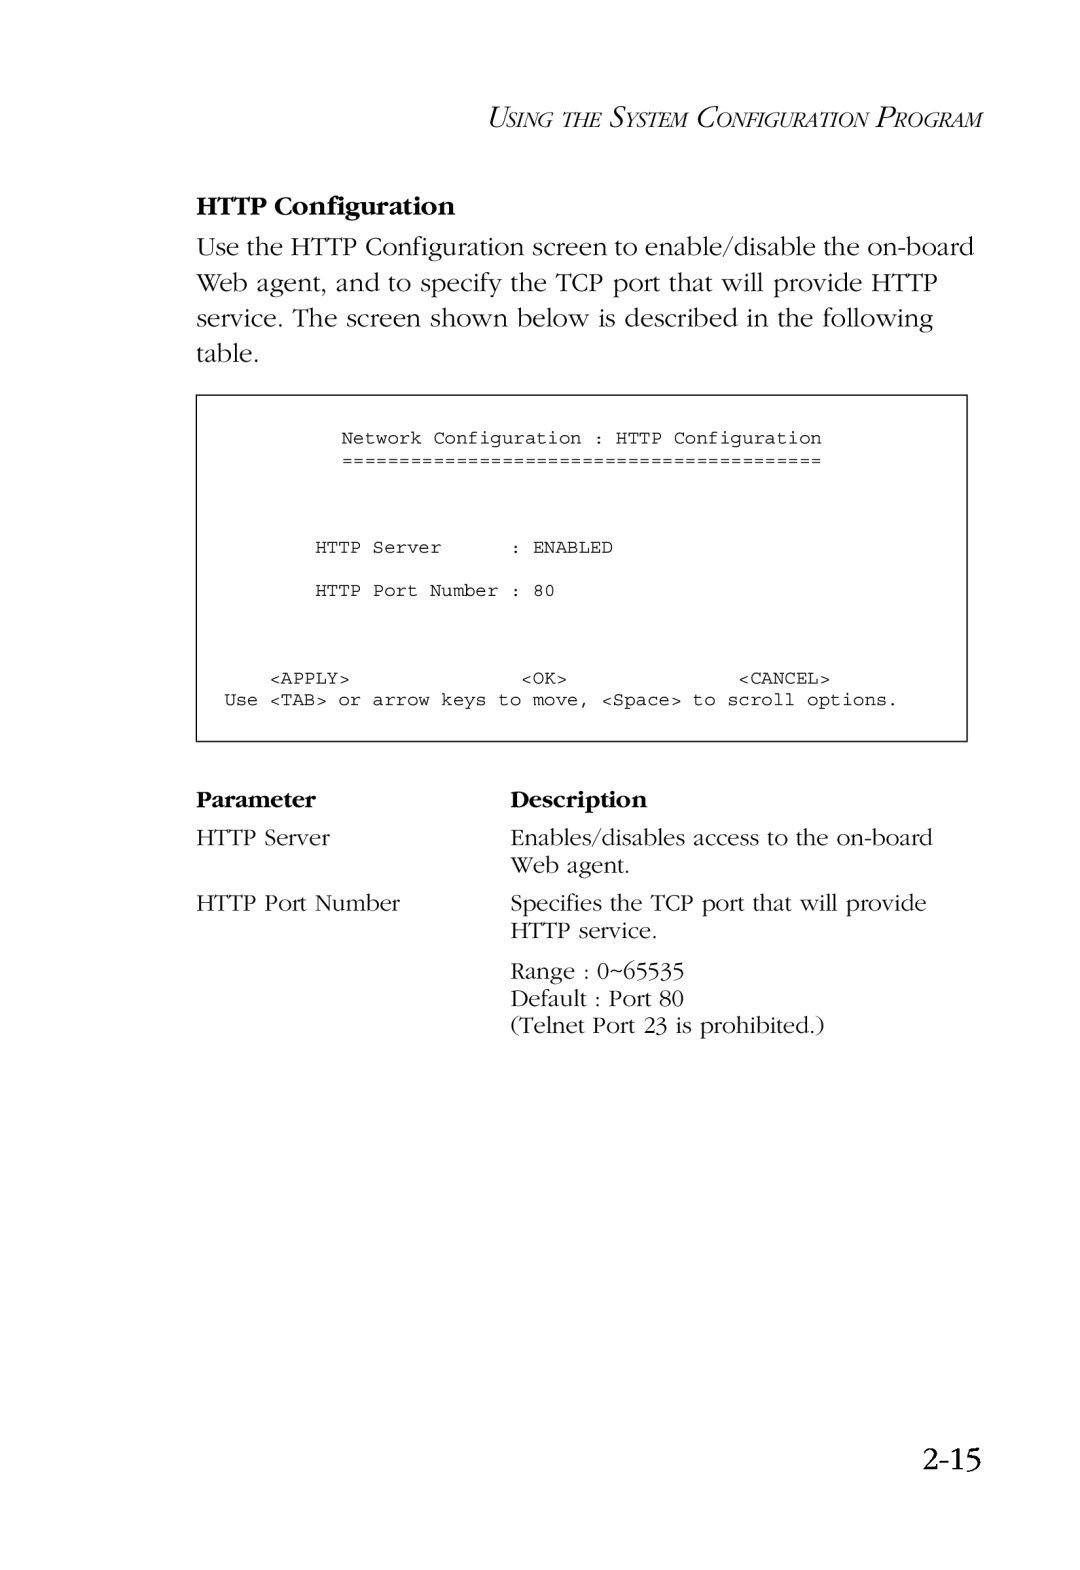 SMC Networks SMC6924VF manual 2-15, HTTP Configuration, HTTP Server, Enables/disables access to the on-board, Web agent 